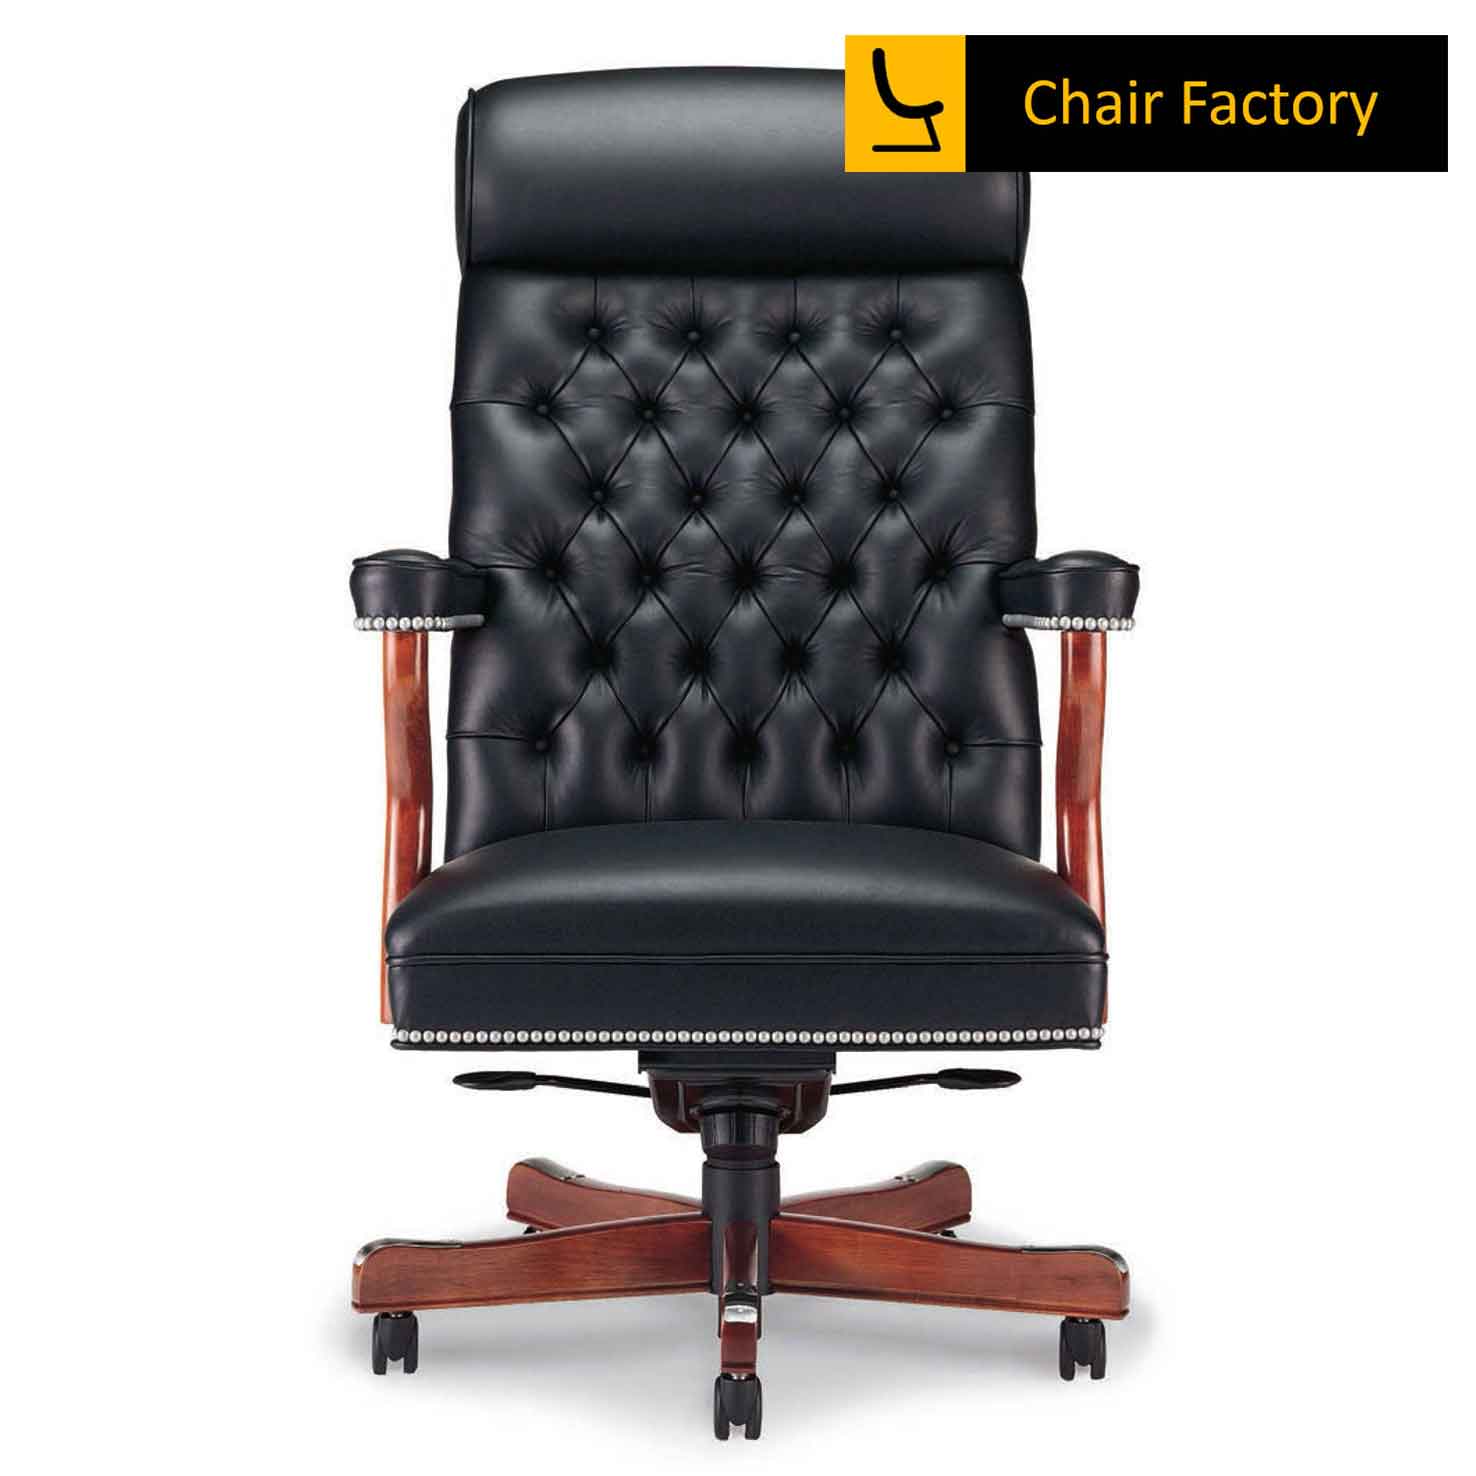 Solicitor 100% Genuine Leather Chair